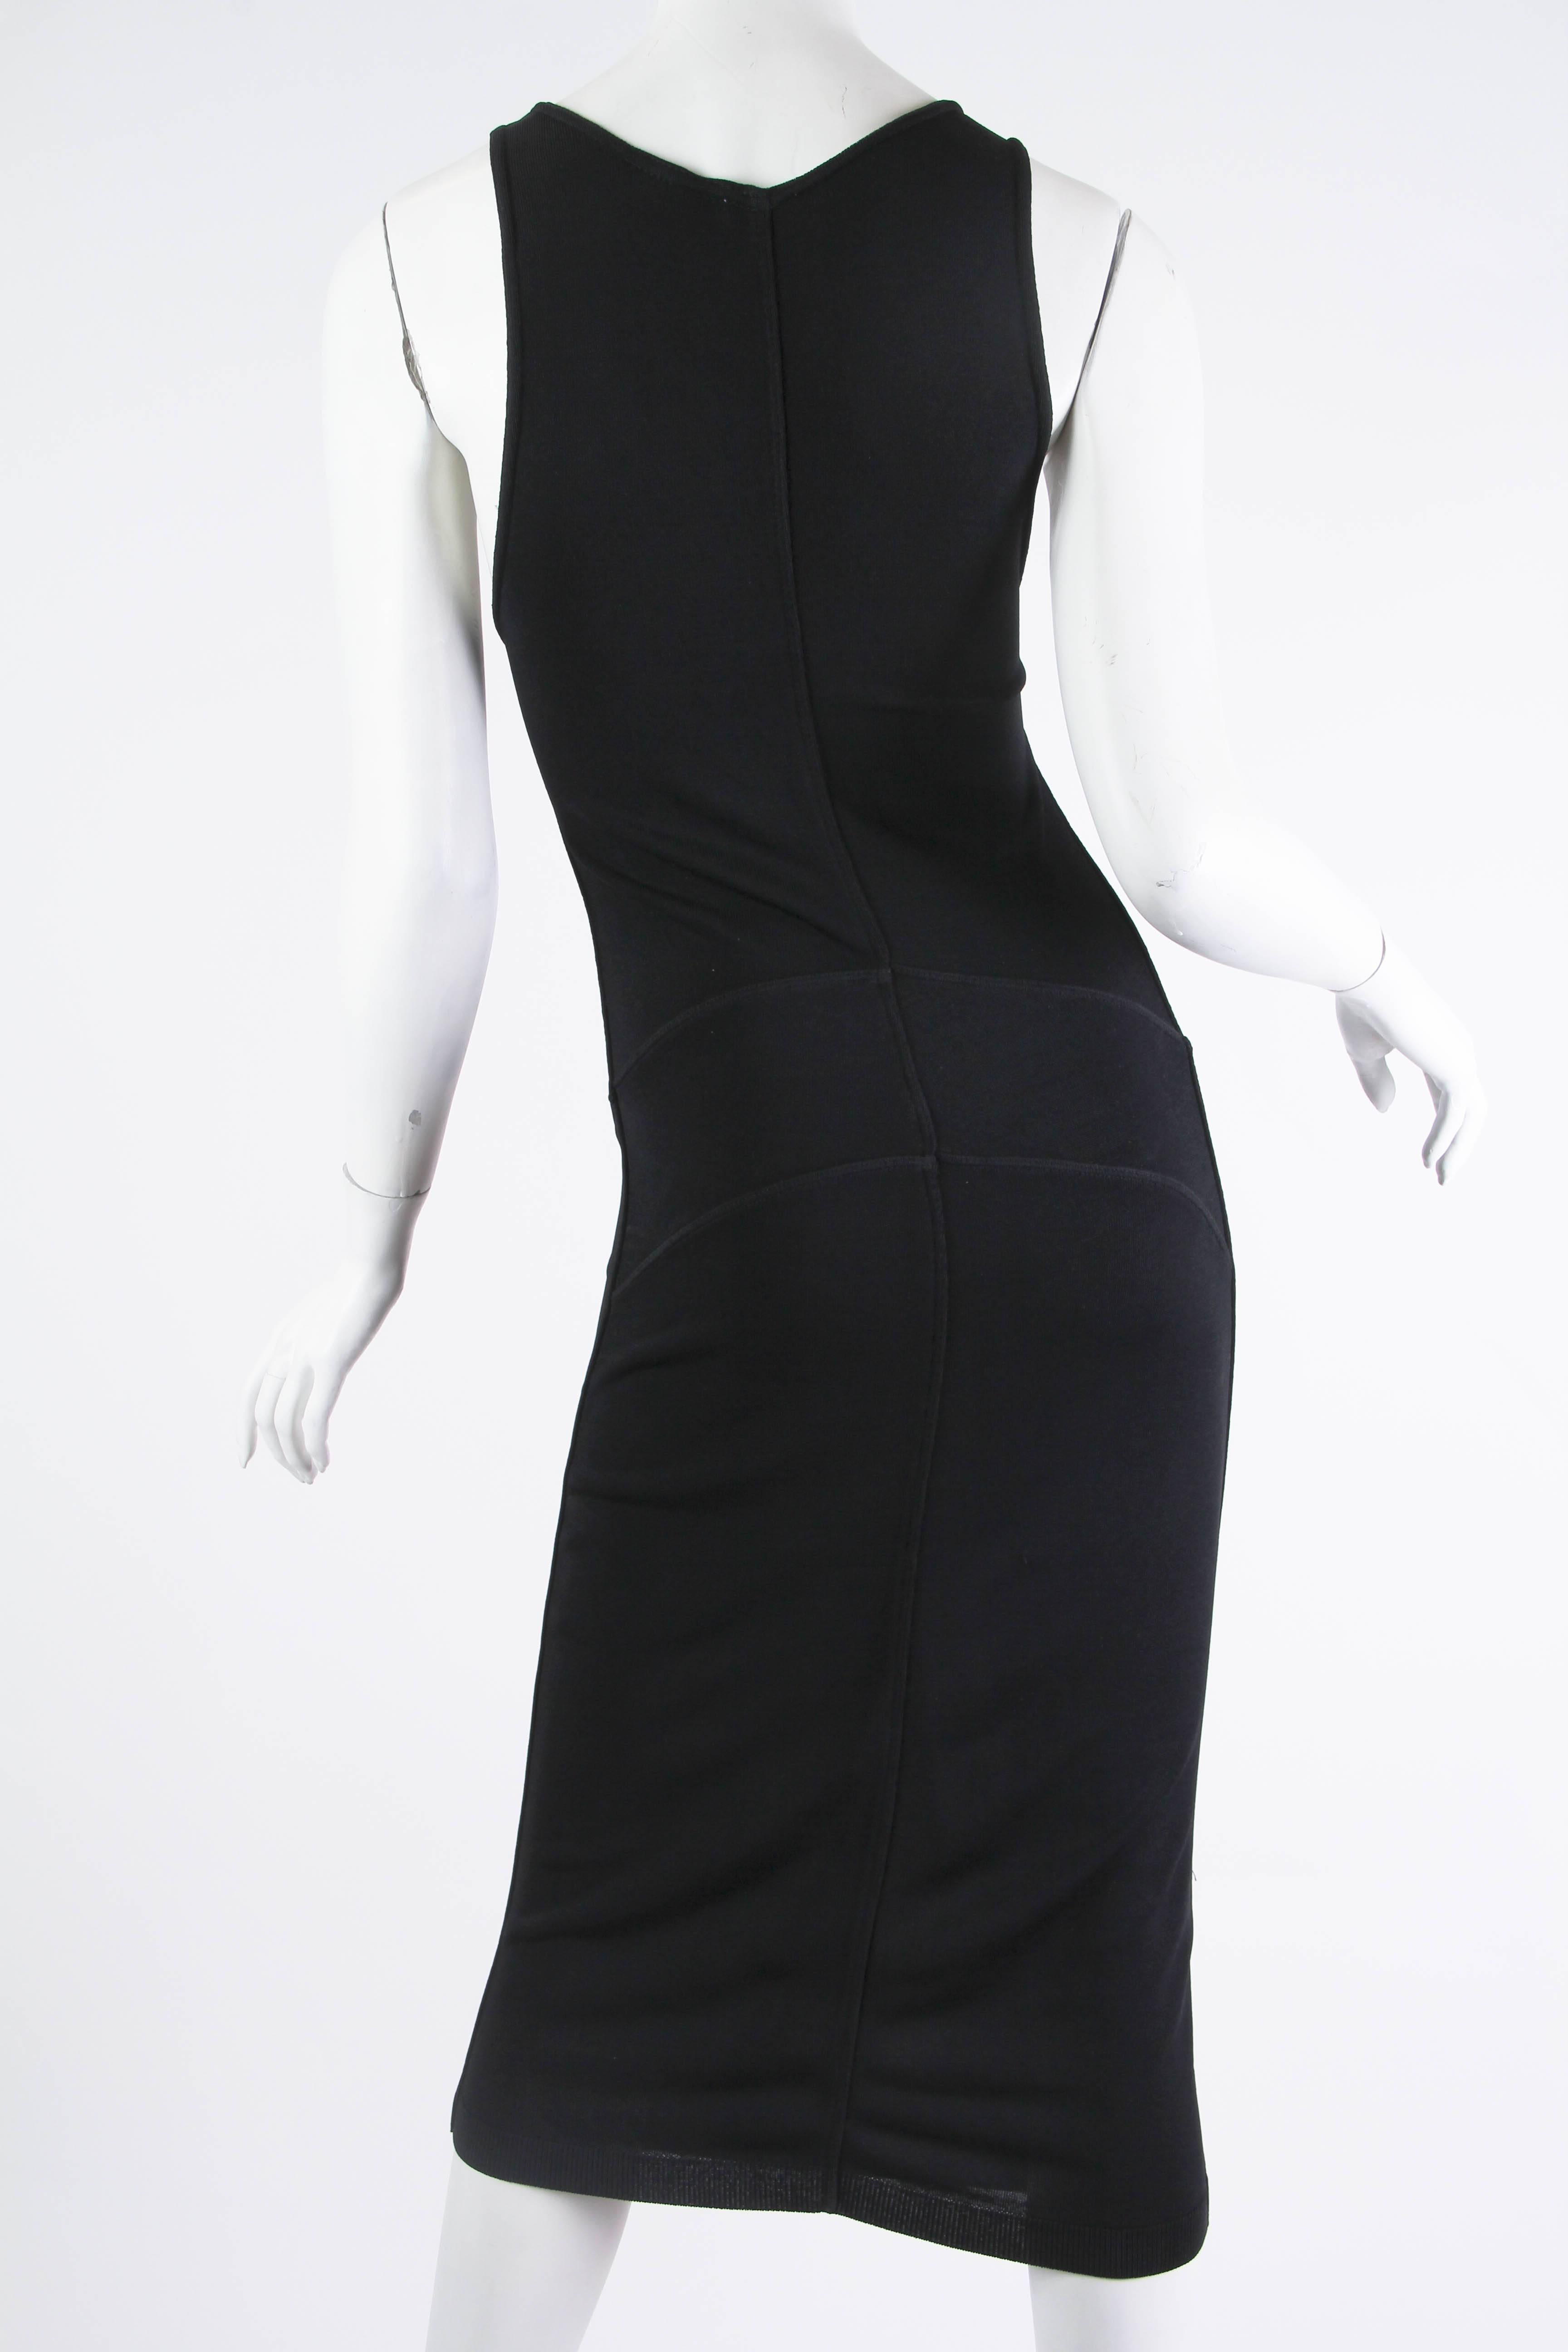 Sublimely Sexy Alaia Dress 1